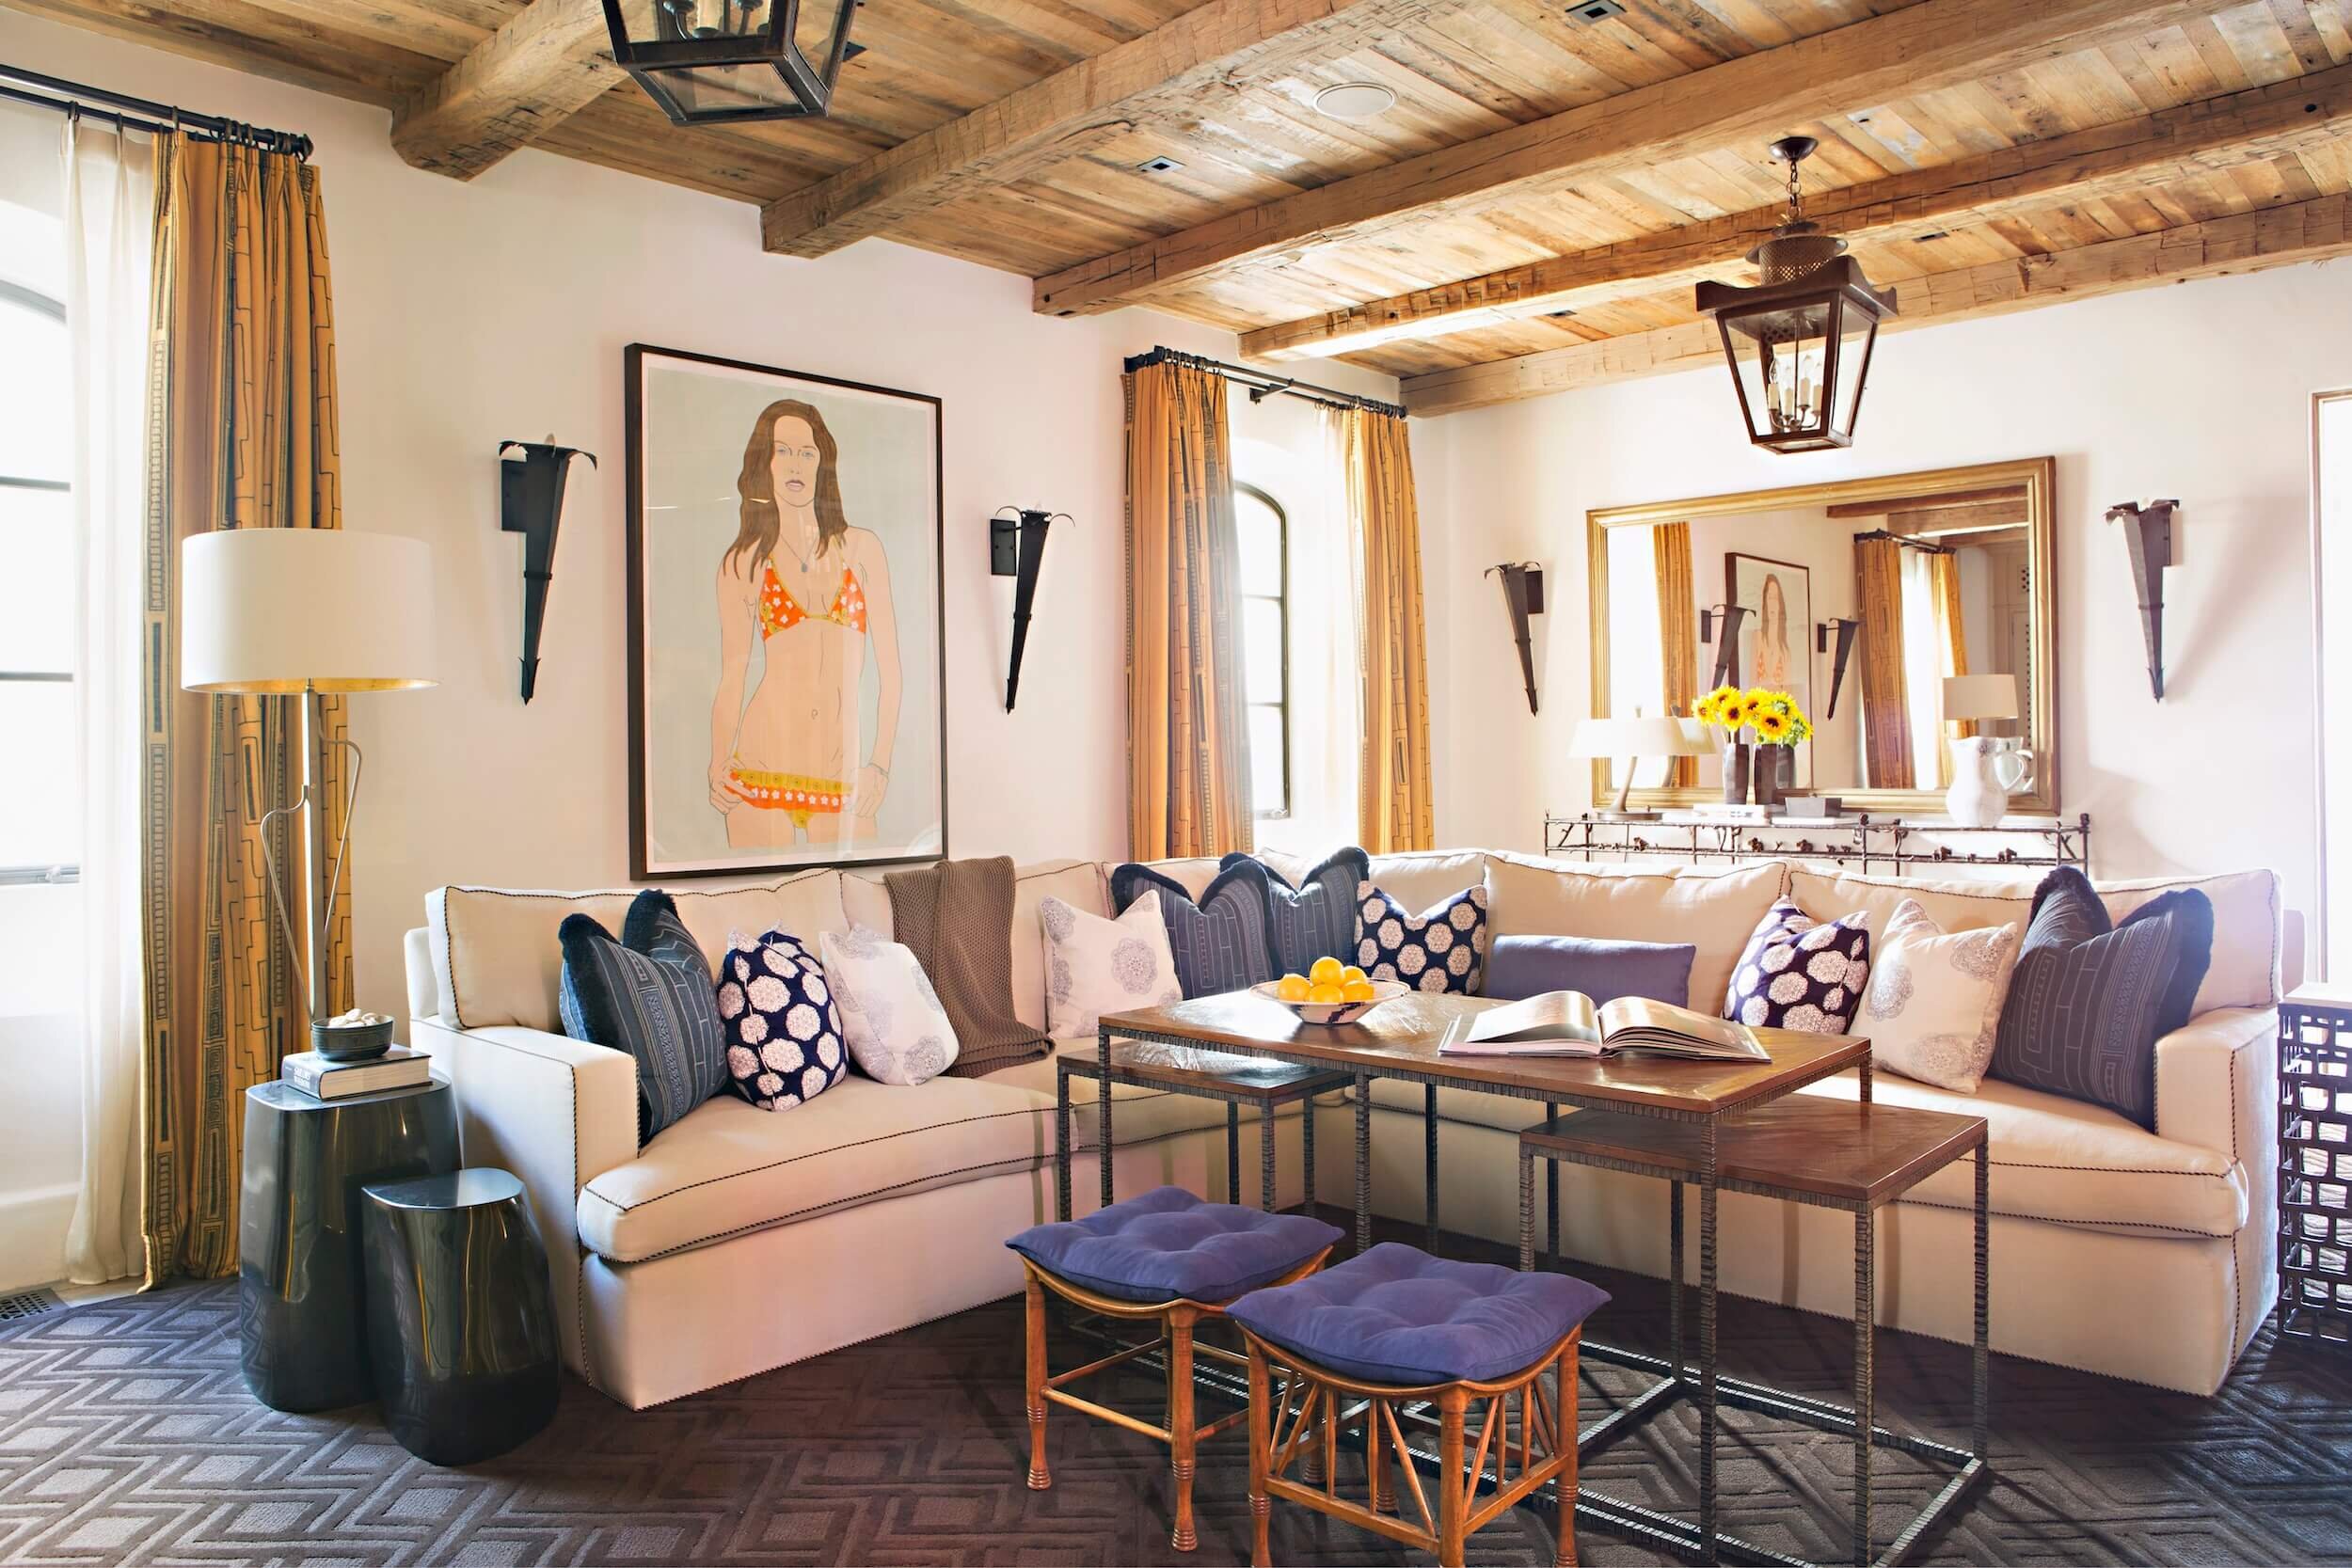 Family Room layered with reclaimed beams., amber accents with an ivory sofa and custom drapery